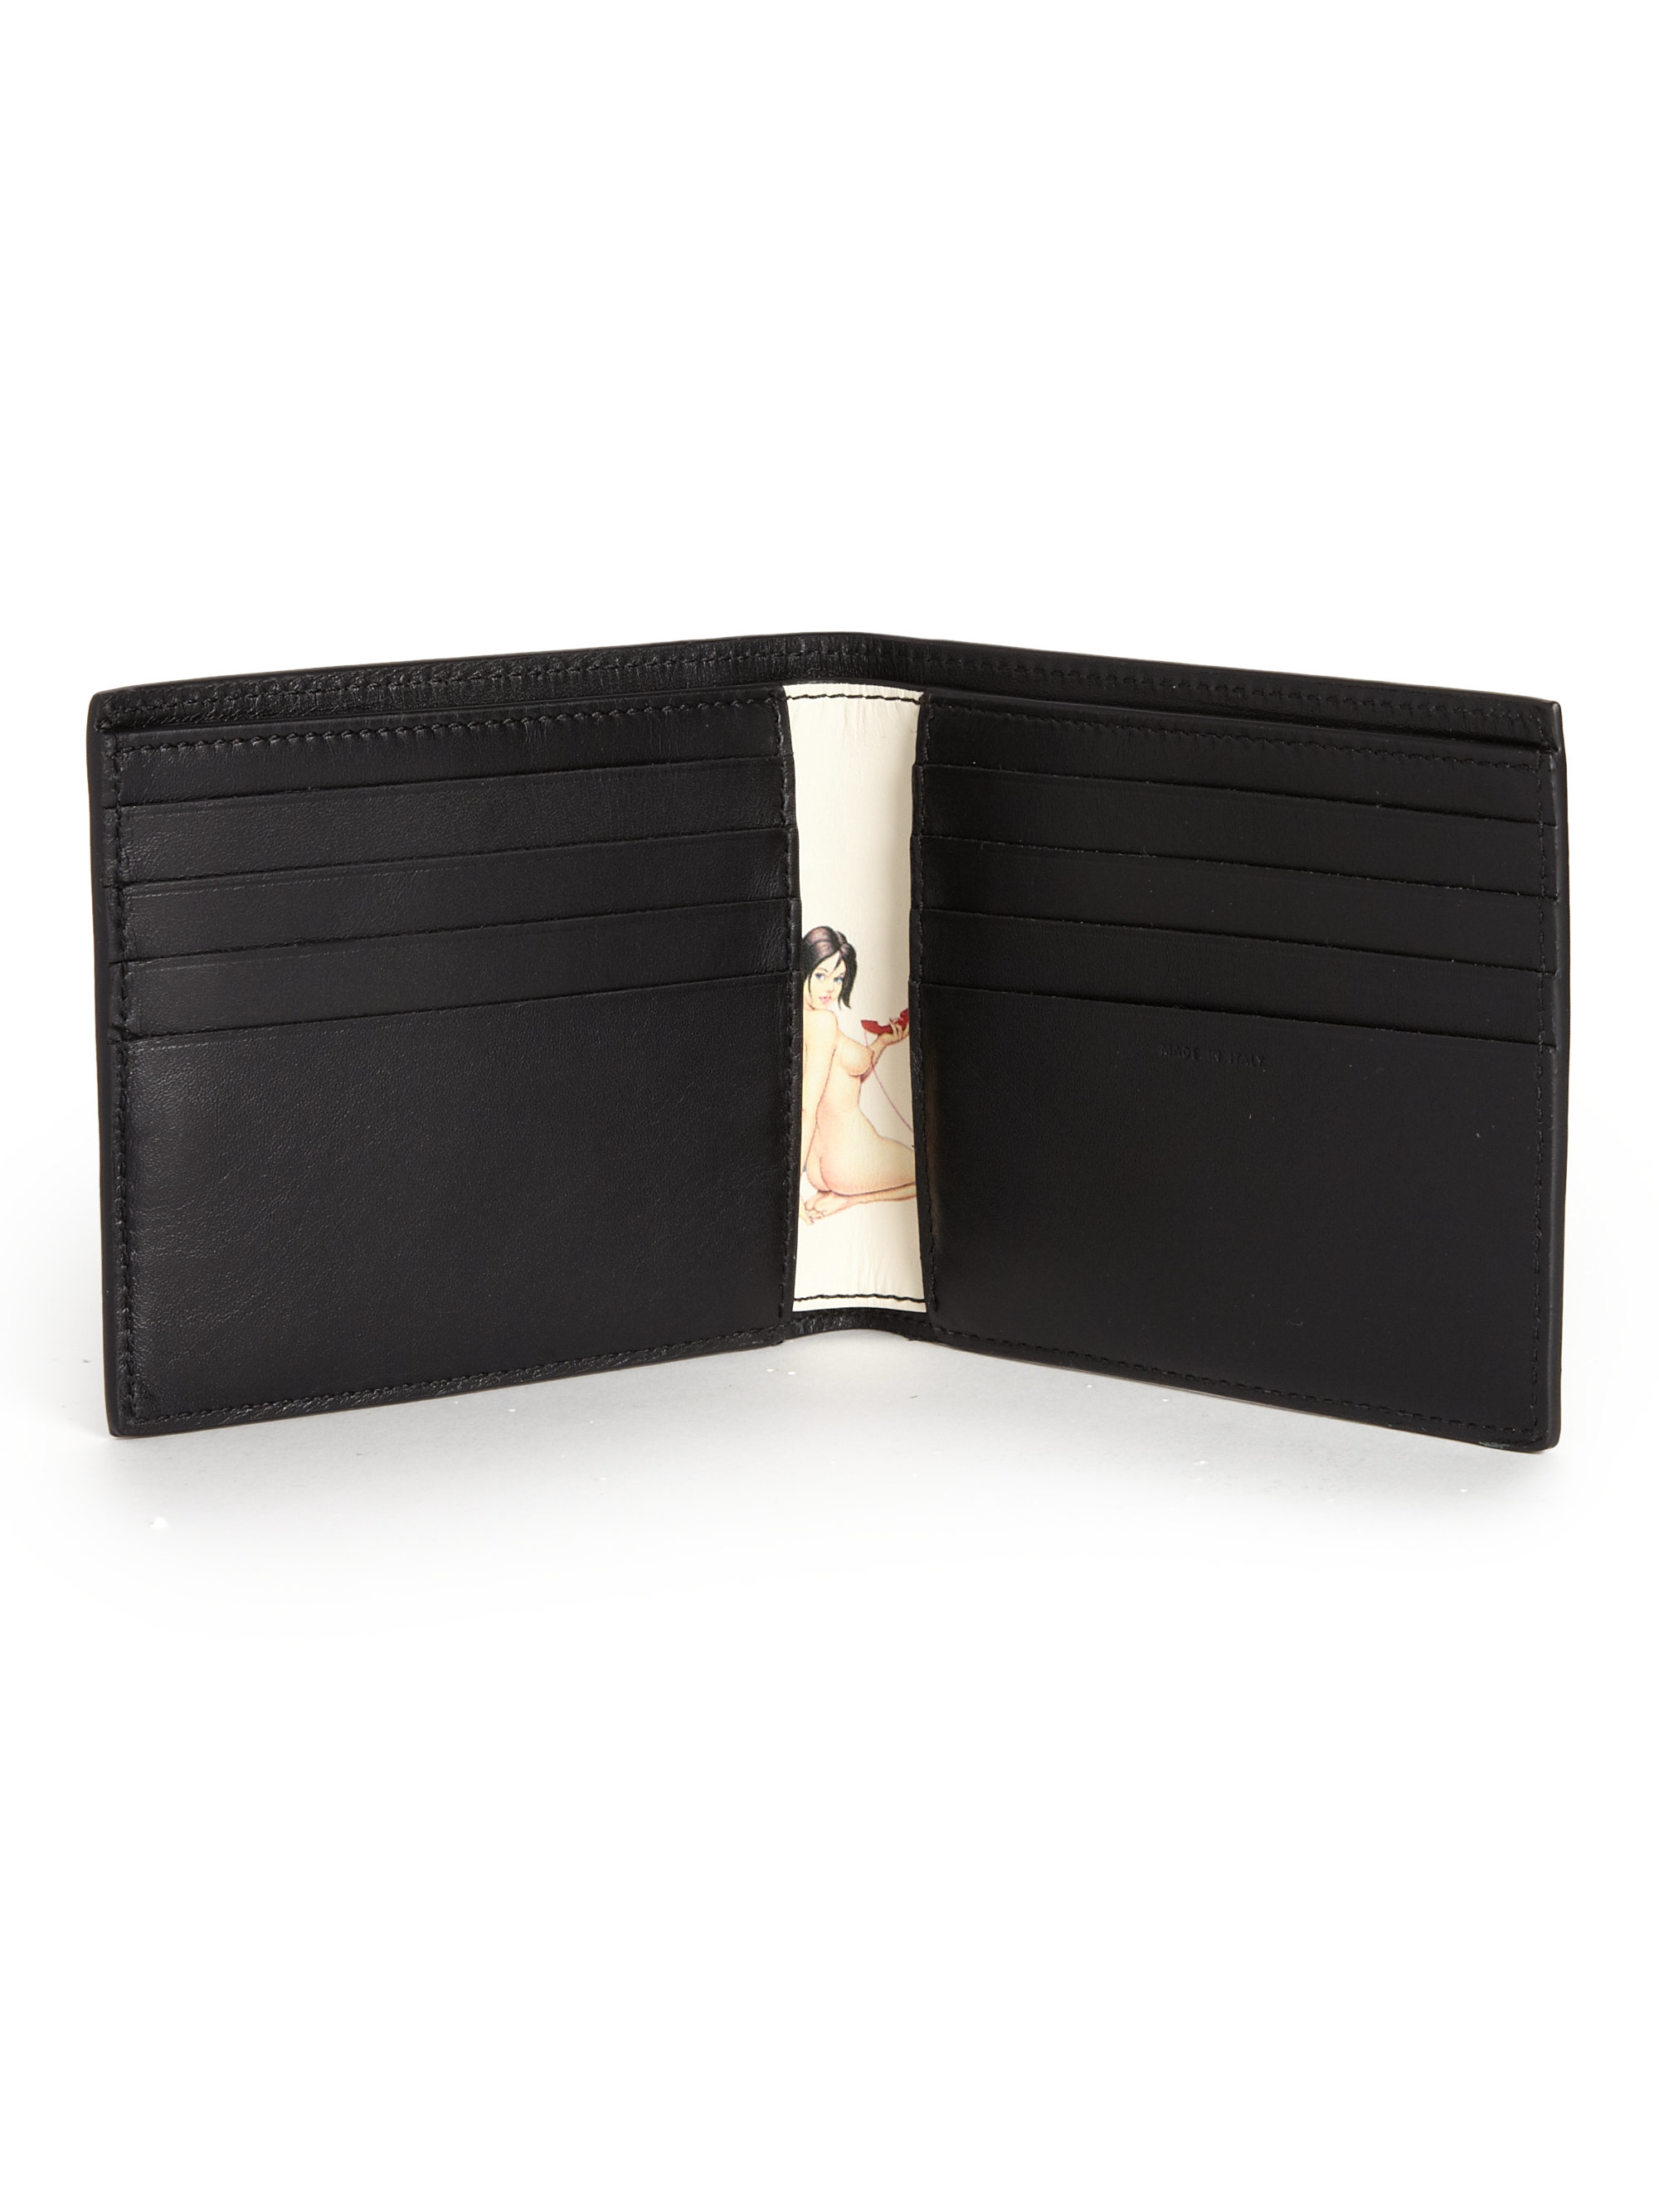 Paul smith Pin-up Girl Leather Bifold Wallet in Black for Men | Lyst